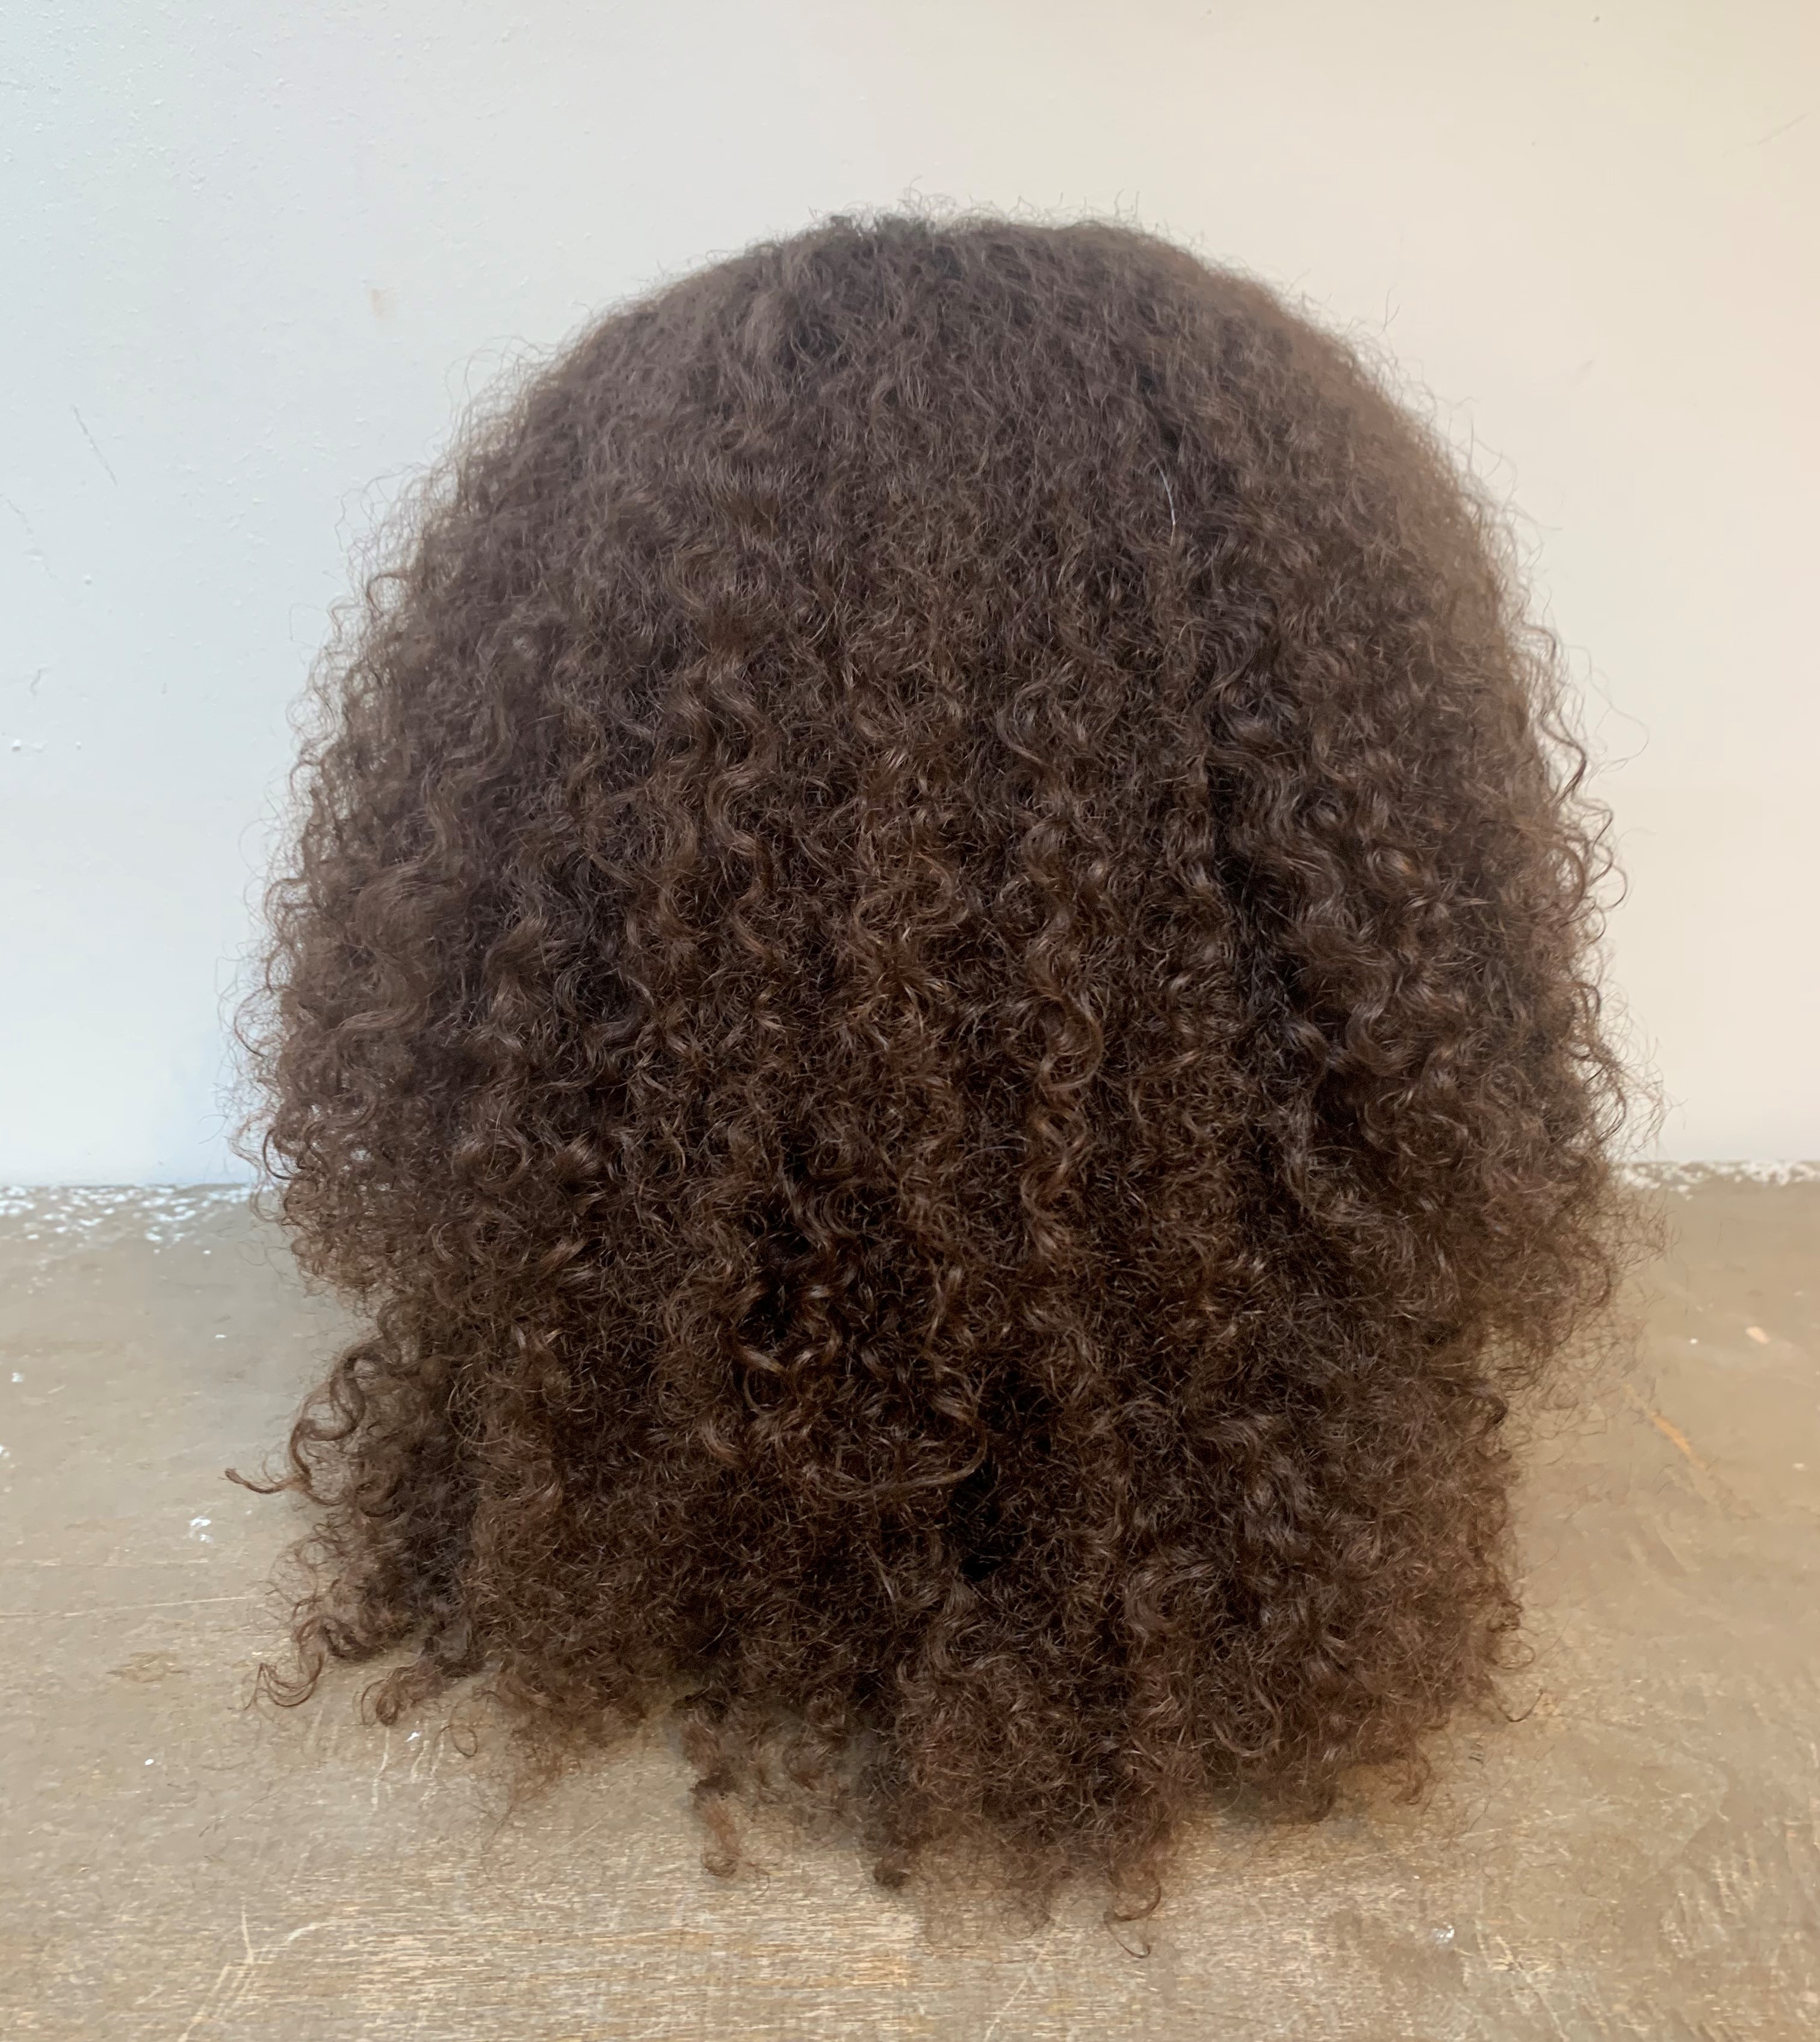 One of the two wigs created from Afro hair donations in The Little Princess Trust's trials.